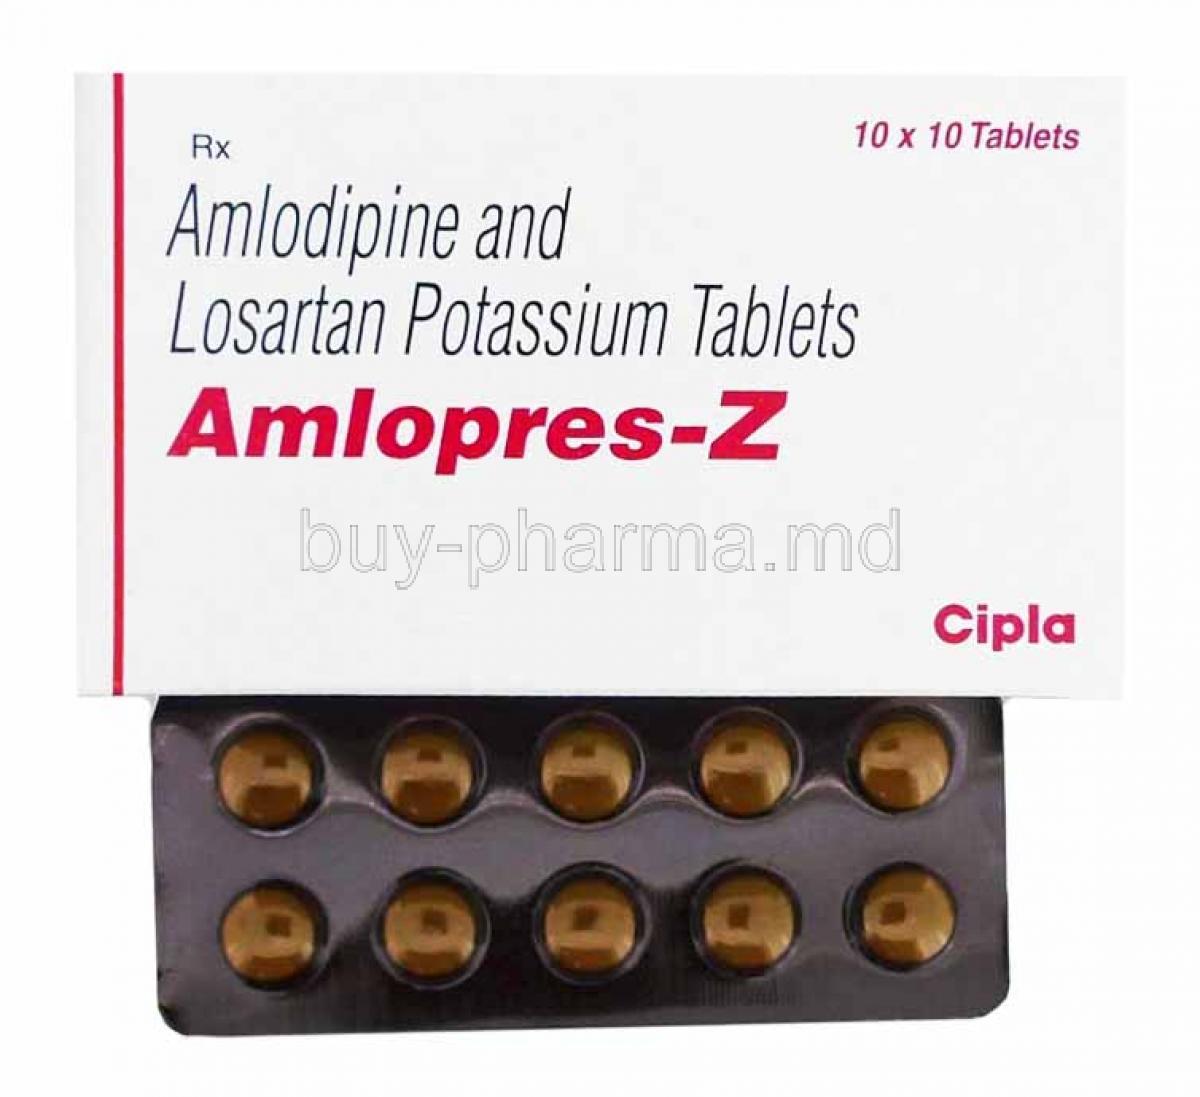 Amlopres-Z, Amlodipine and Losartan box and tablets